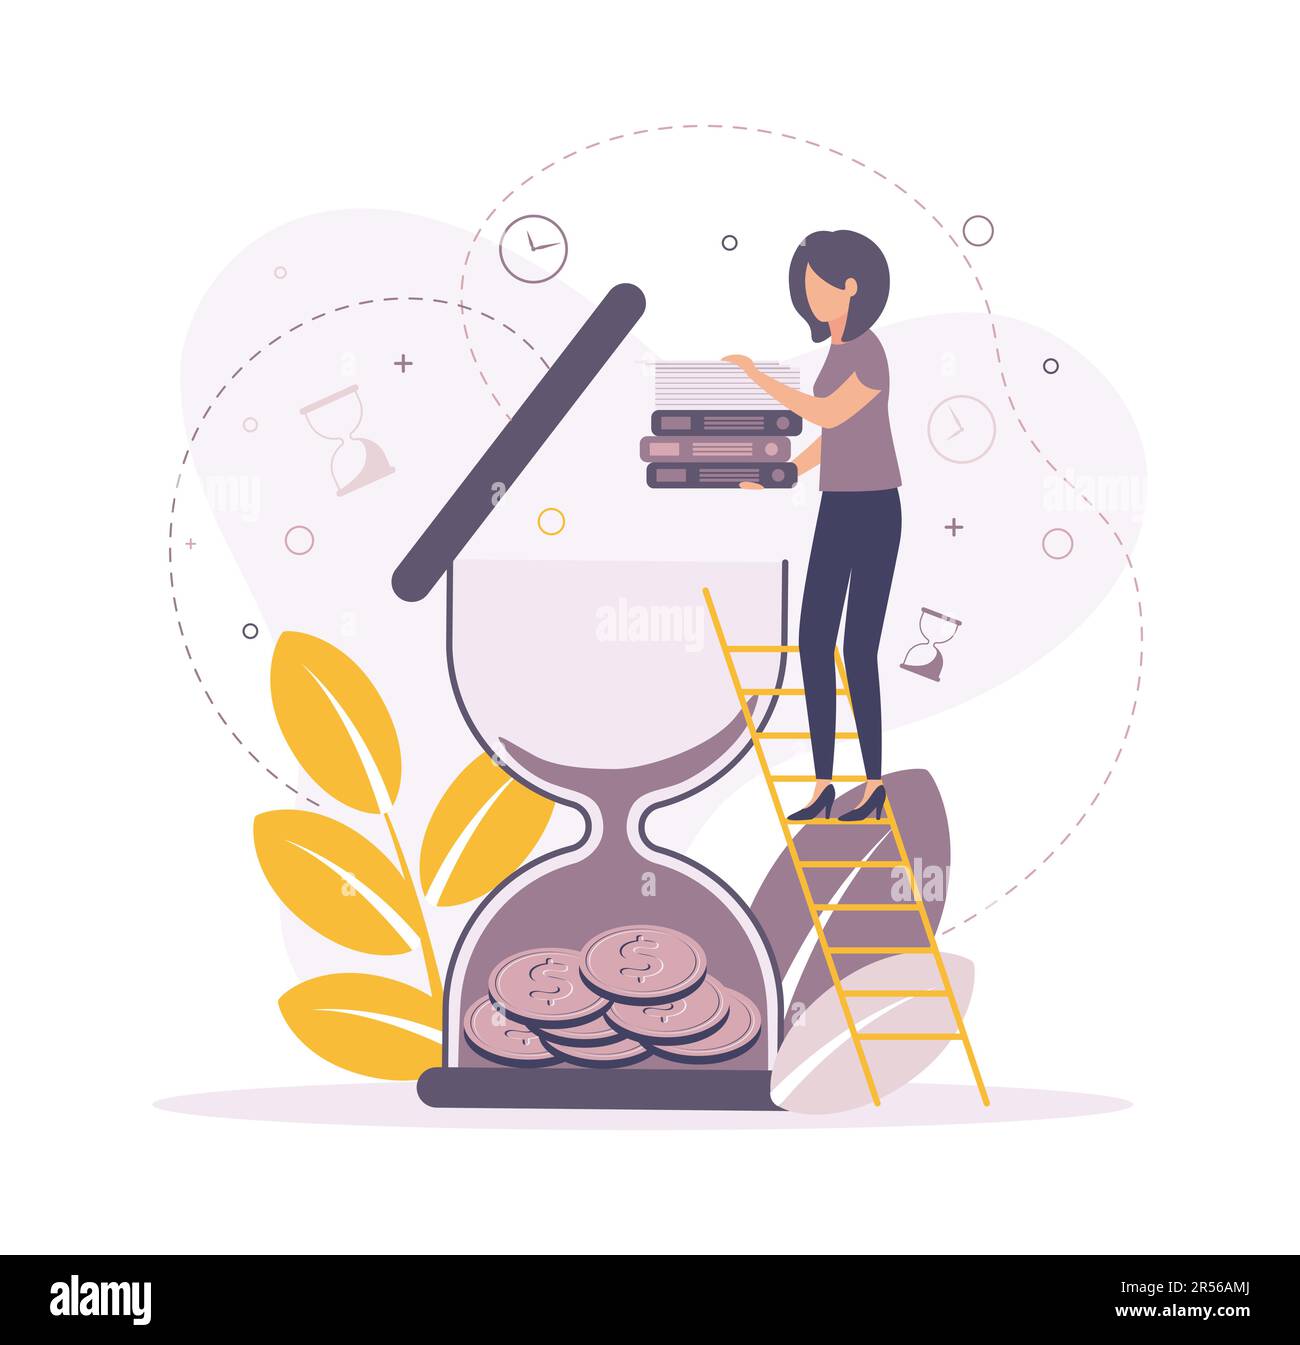 Time management illustration. Illustration of a woman standing on the stairs, puts documents in the hourglass in which the coins lie. Stock Vector